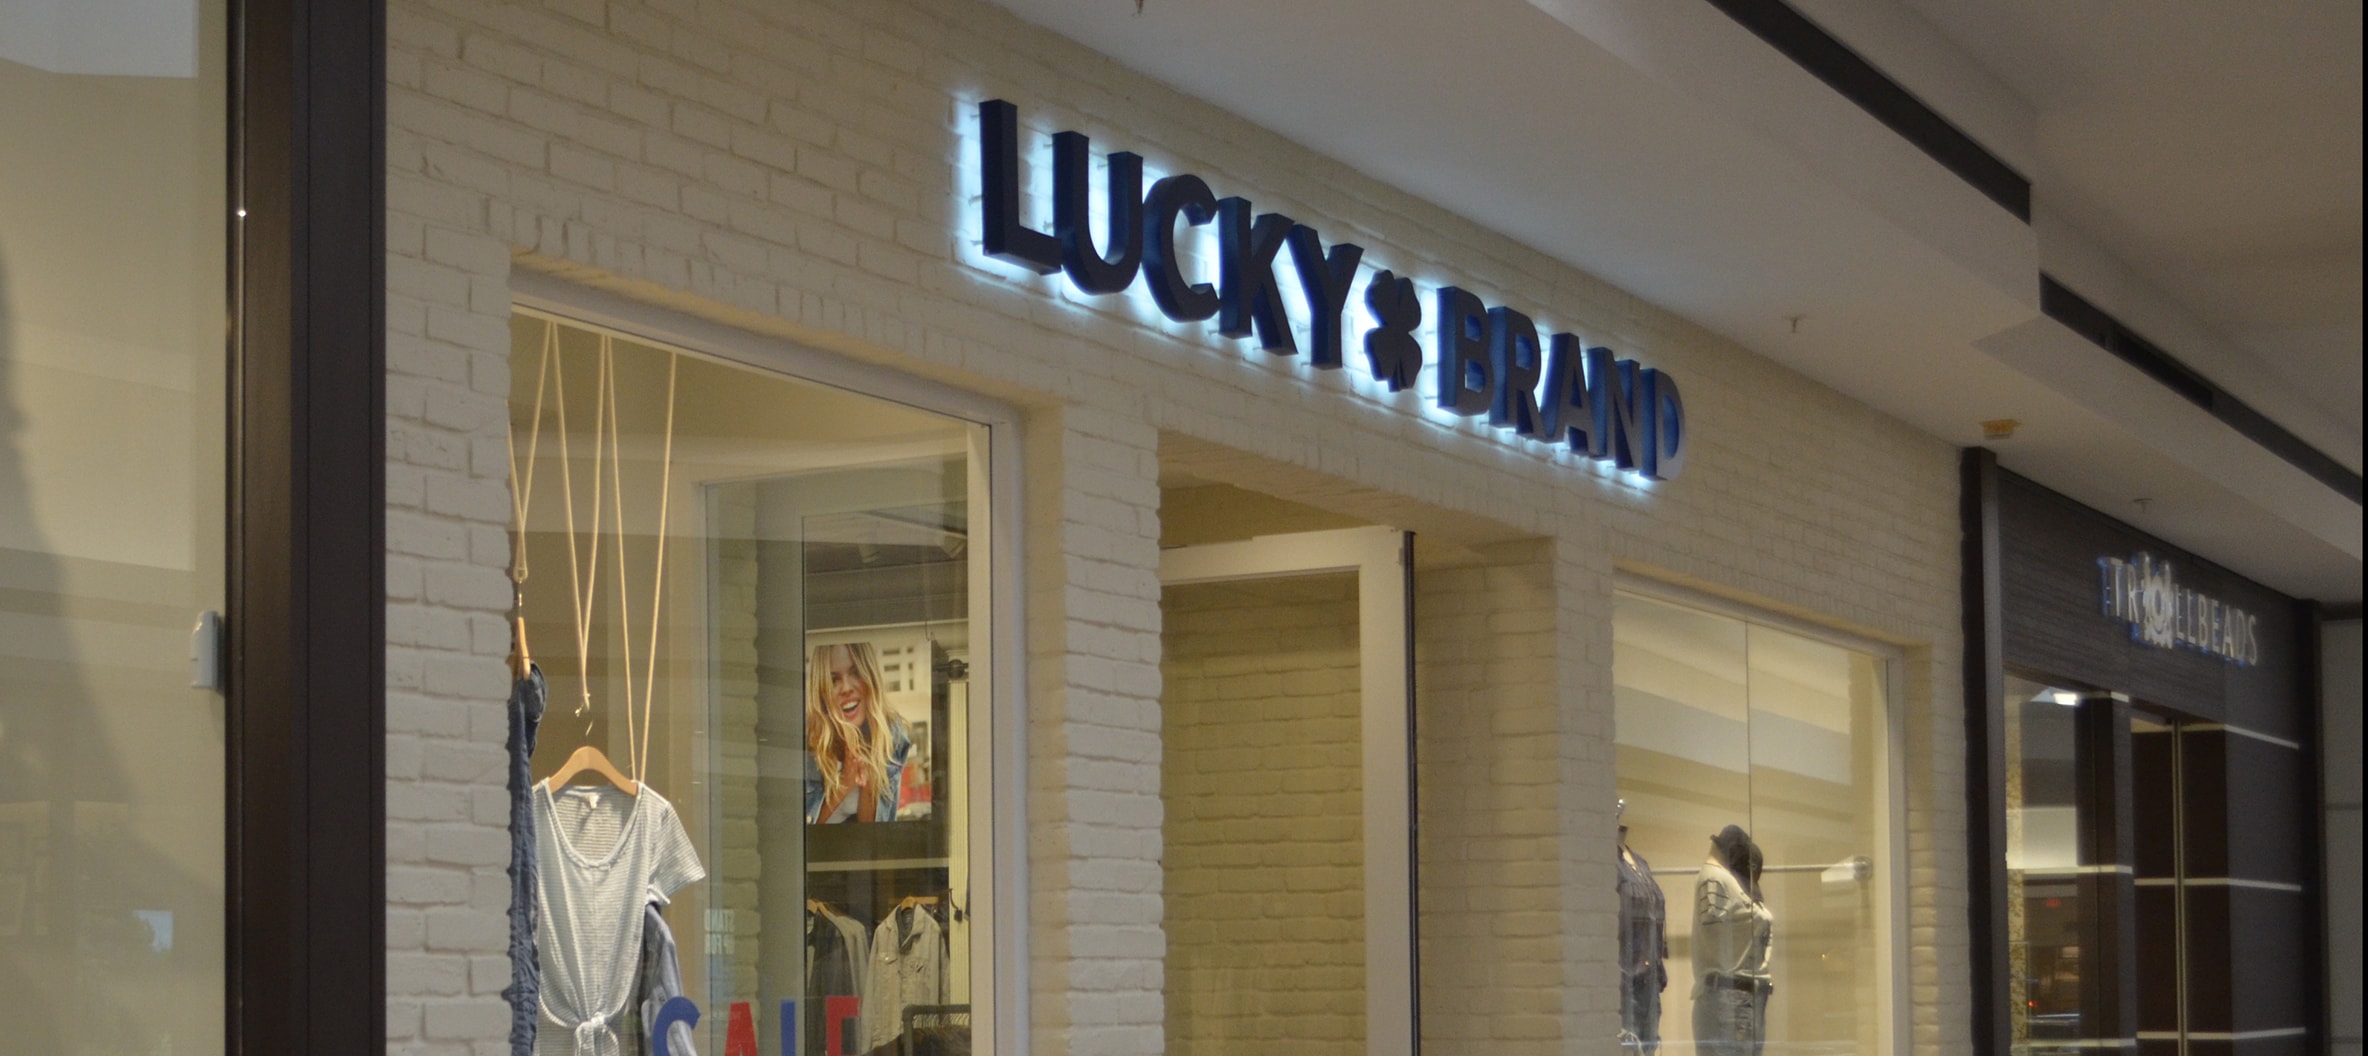 lucky brand west town mall